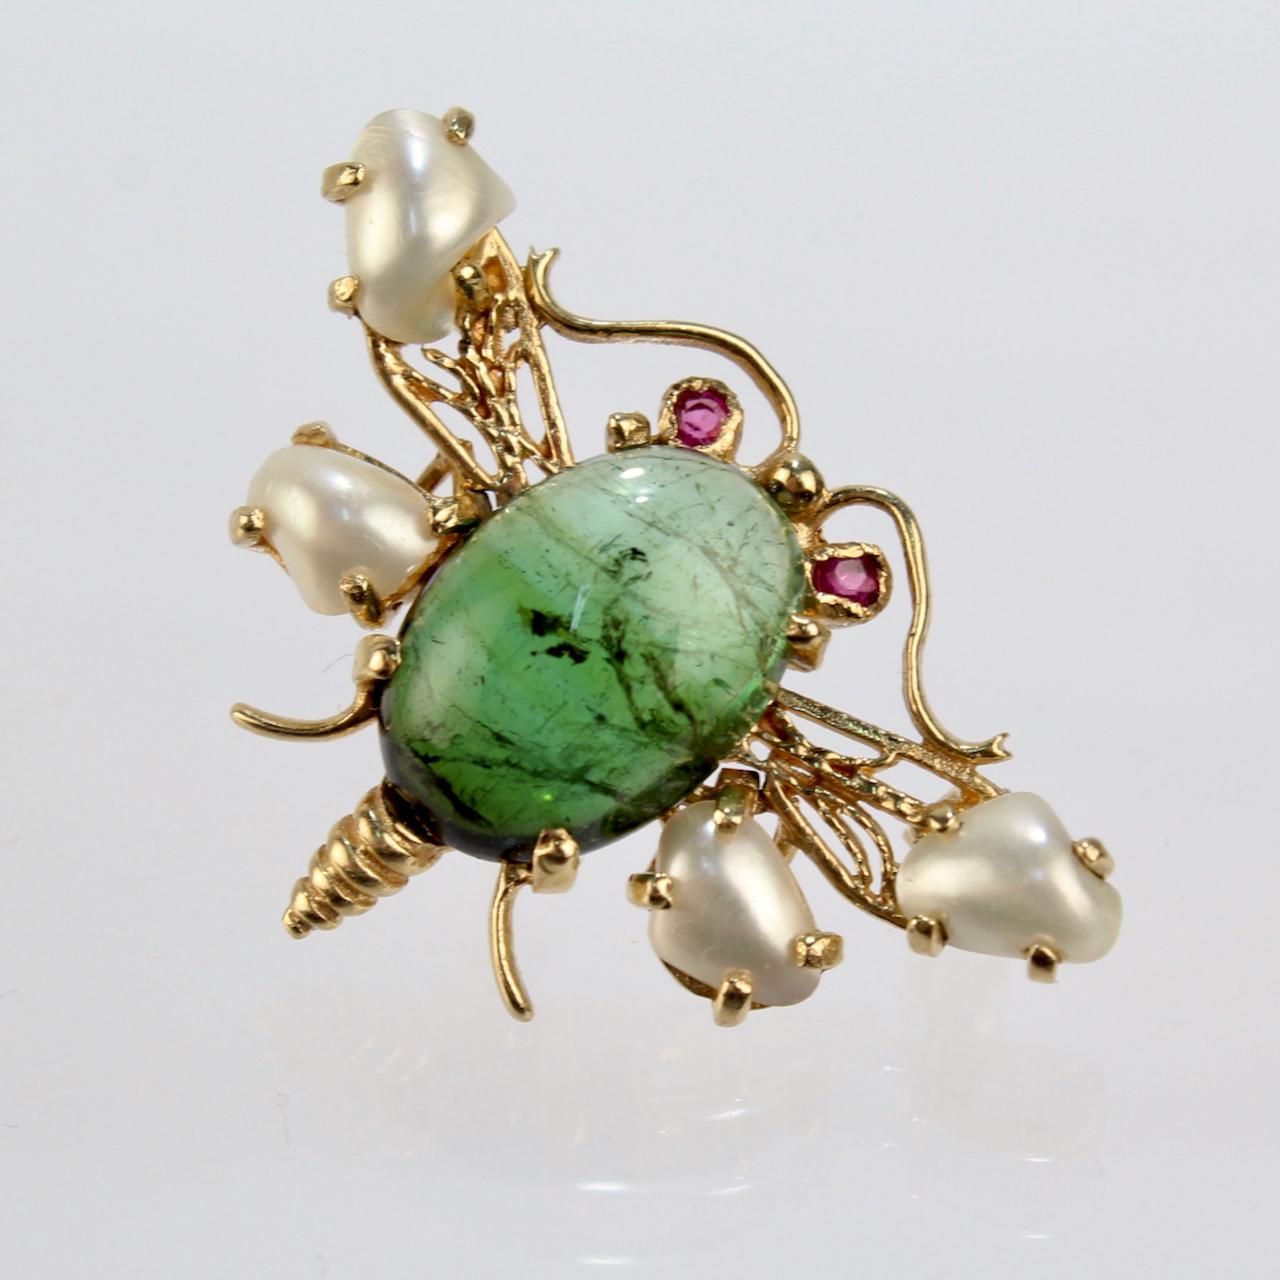 A very fine figural 14k gold bee (or insect) brooch with wings that move.

Prong-set with a green tourmaline oval cabochon at the center of the body of the bee. 

Four pearls are set at the ends of the bee's wings. The two bottom wings are hinged.